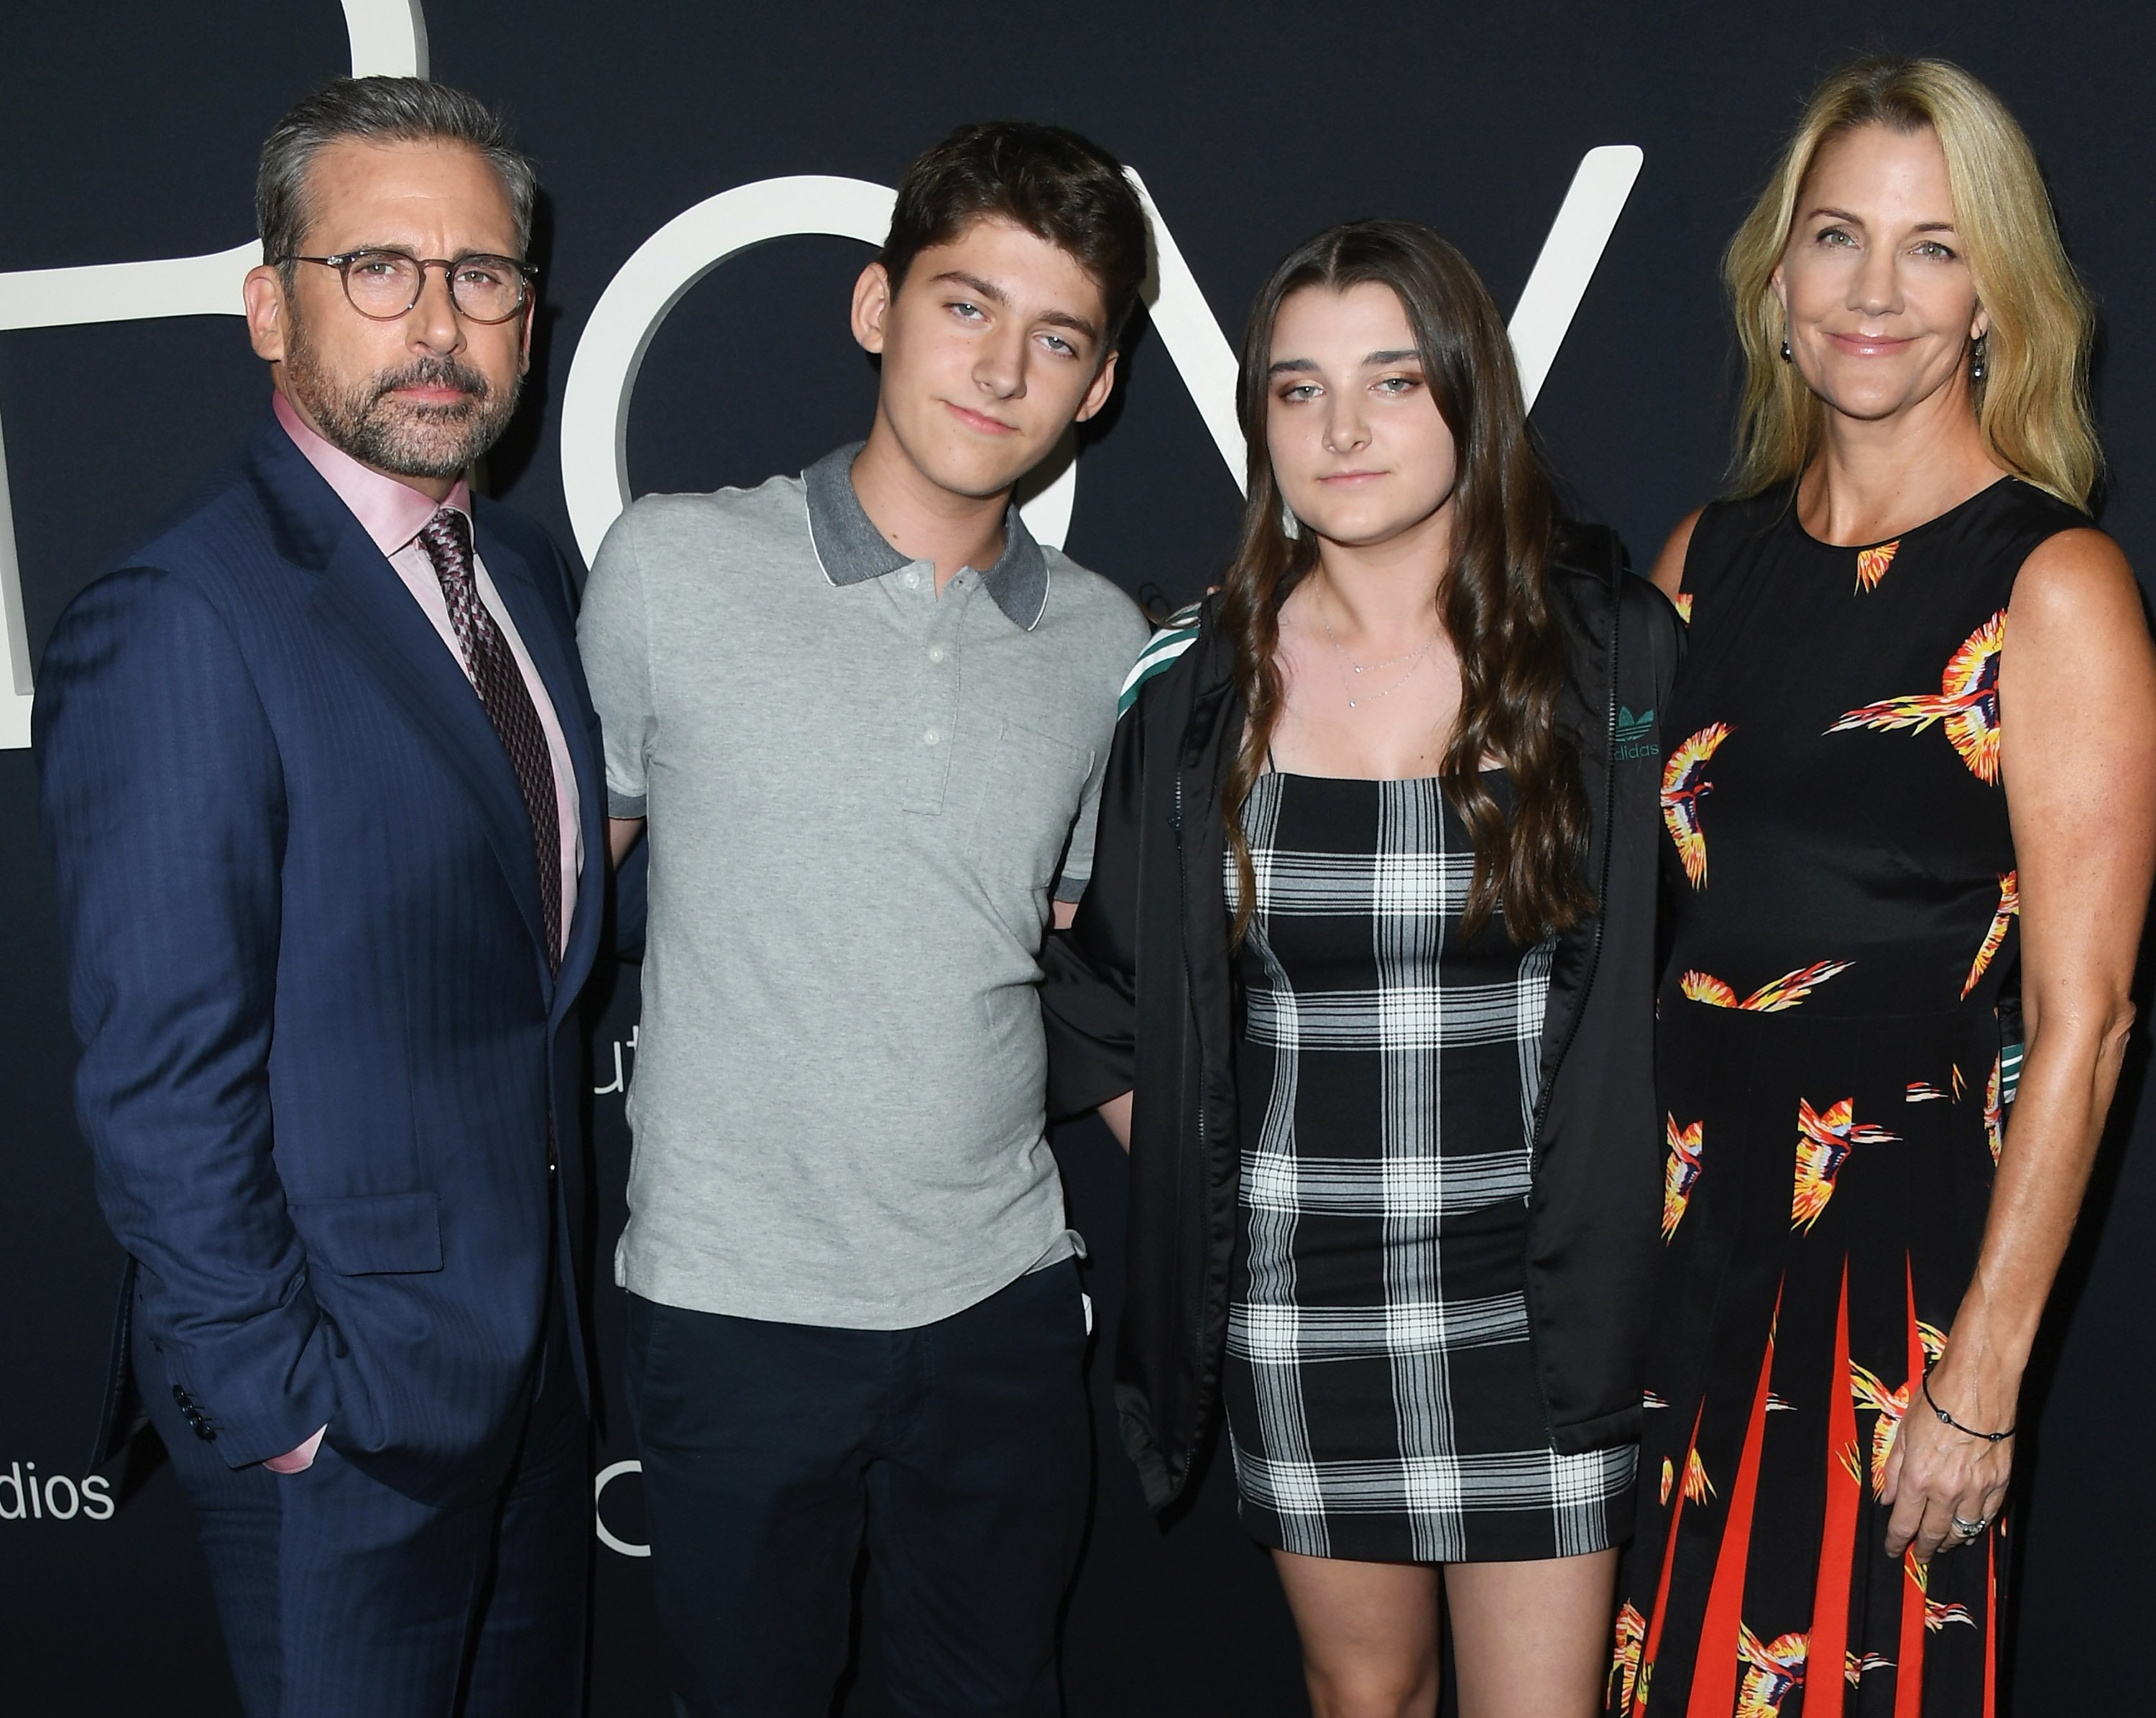  Steve Carell, John Carell, Elisabeth Anne Carell and Nancy Carell at the premiere of "Beautiful Boy" on October 8, 2018 in Beverly Hills, California. | Photo: GettyImages